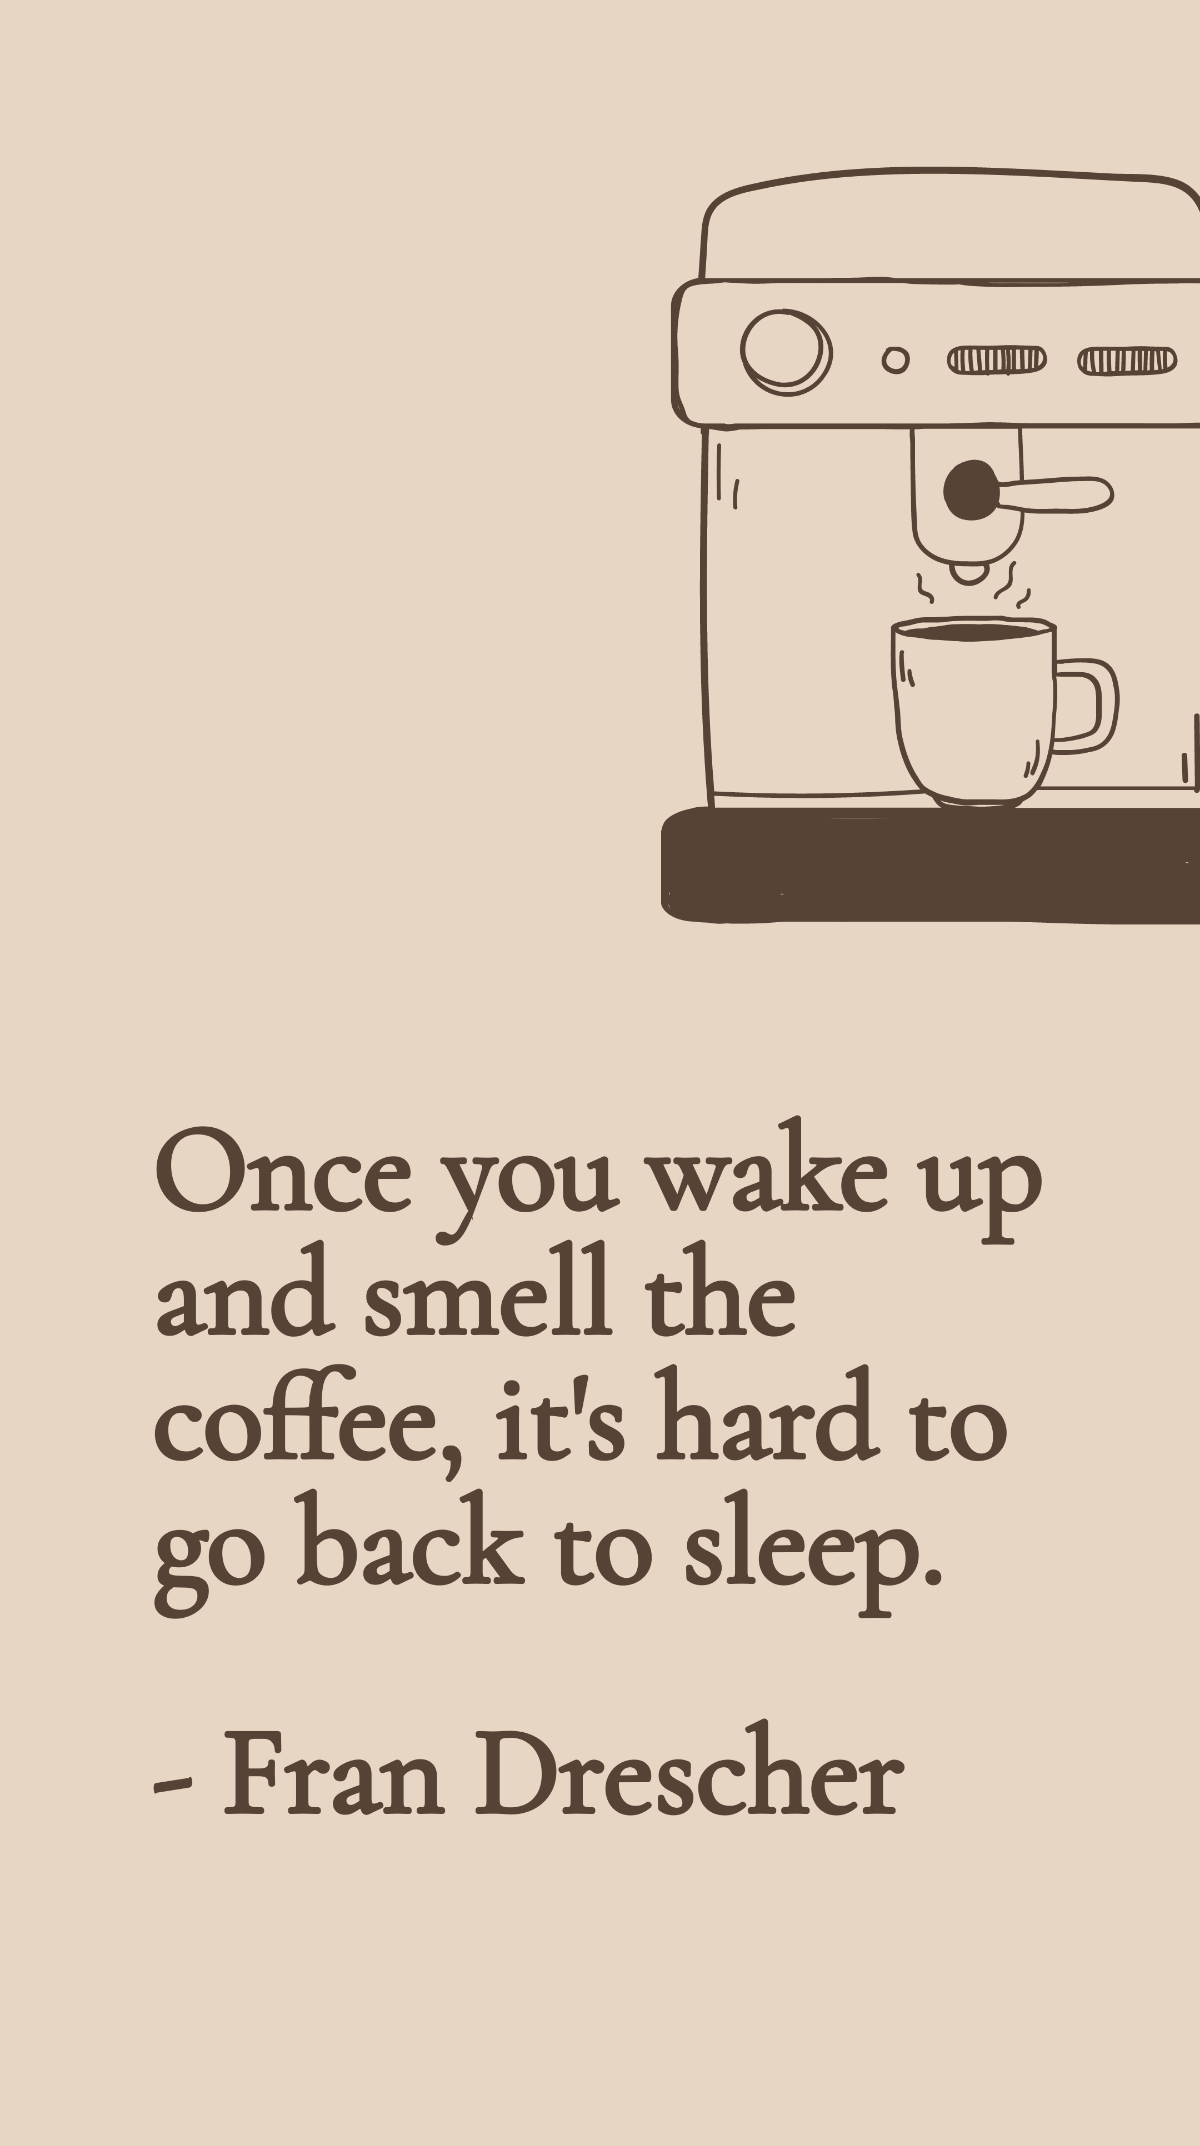 Fran Drescher - Once you wake up and smell the coffee, it's hard to go back to sleep.